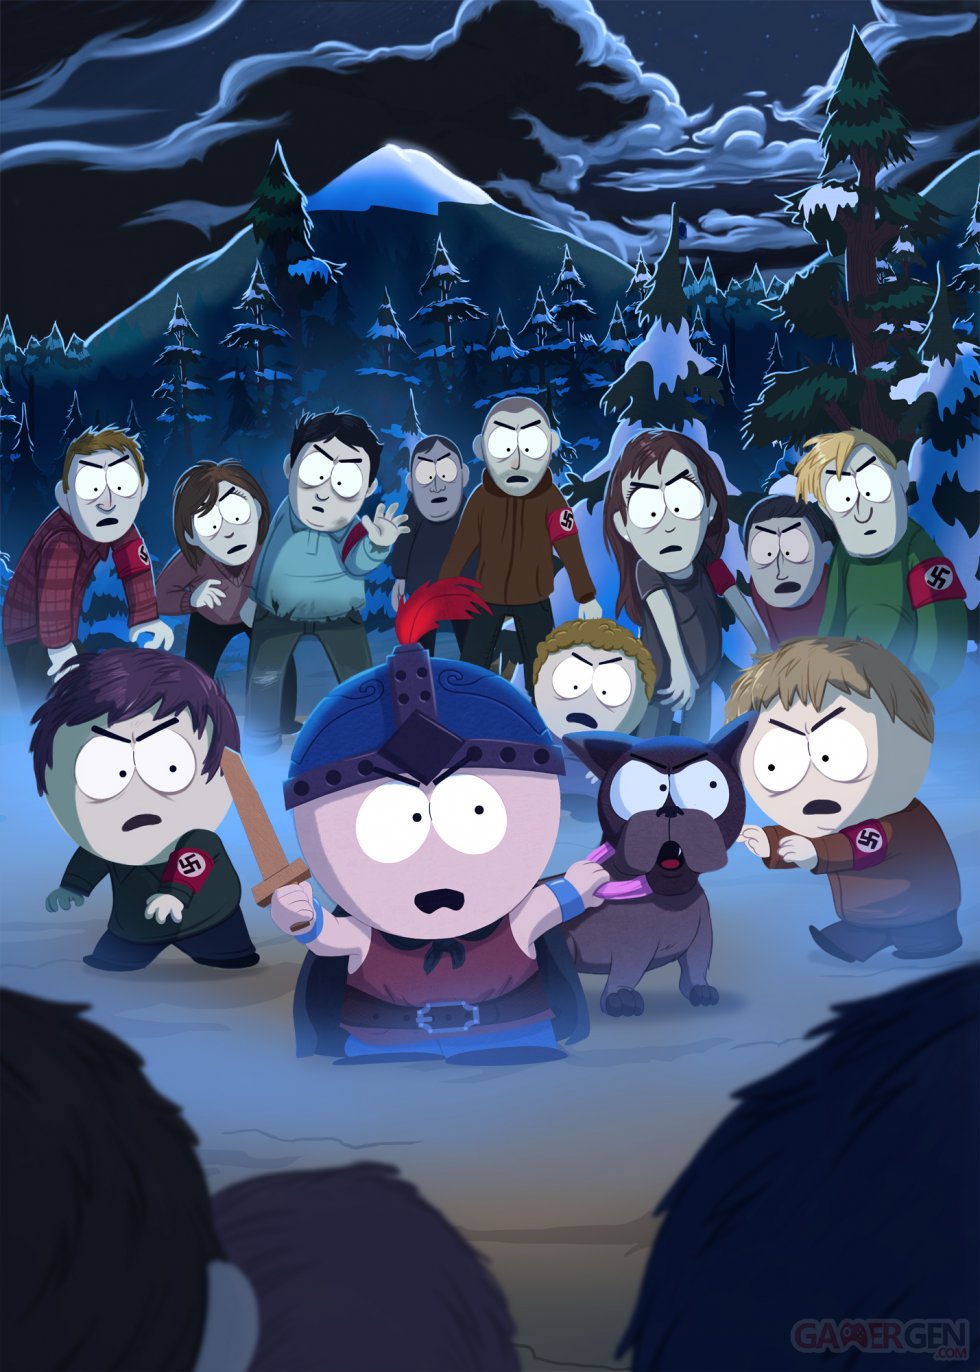 South-Park-The-Stick-of-Truth_15-02-2014_art-5